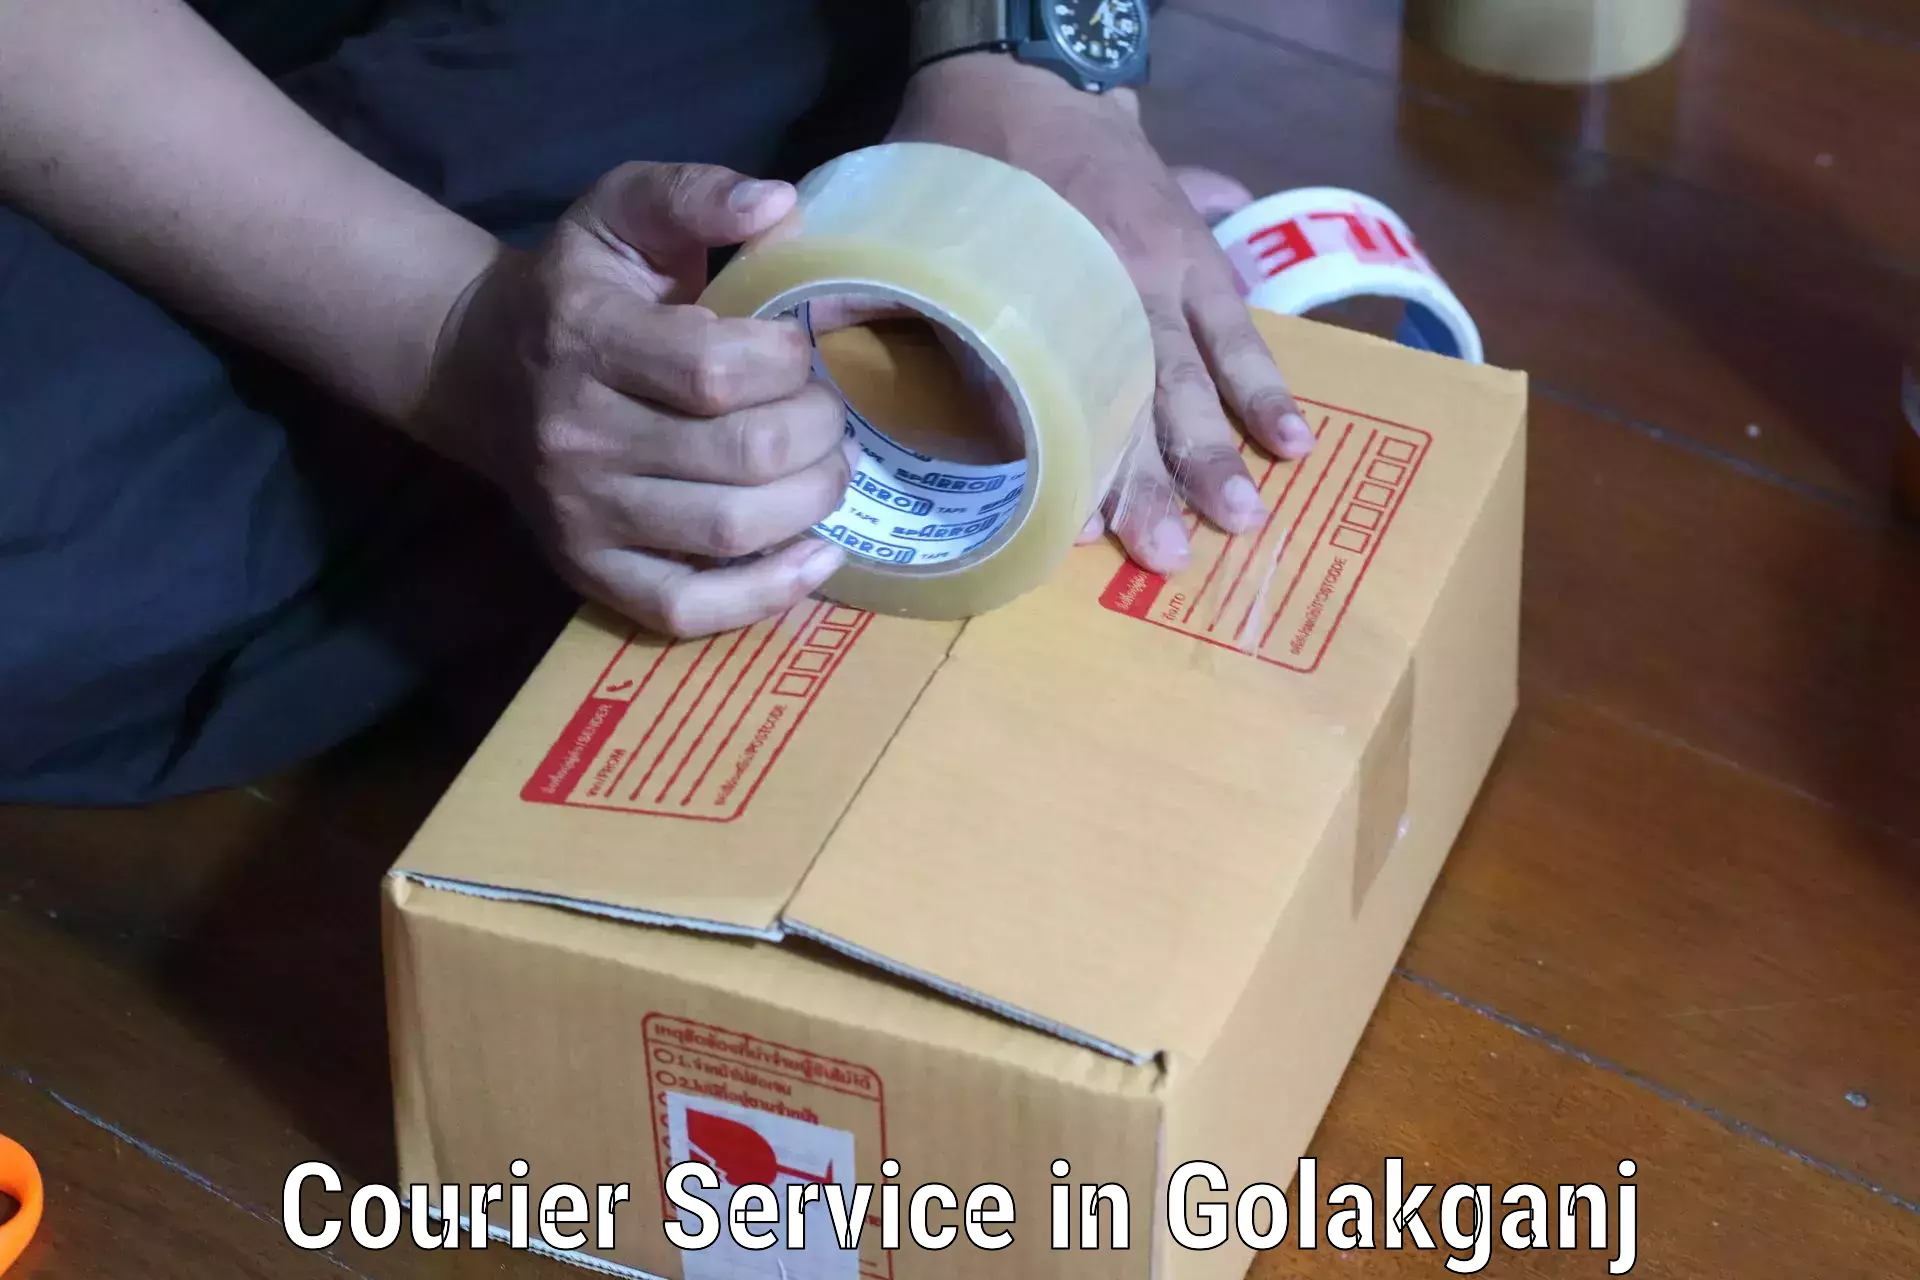 Express courier facilities in Golakganj